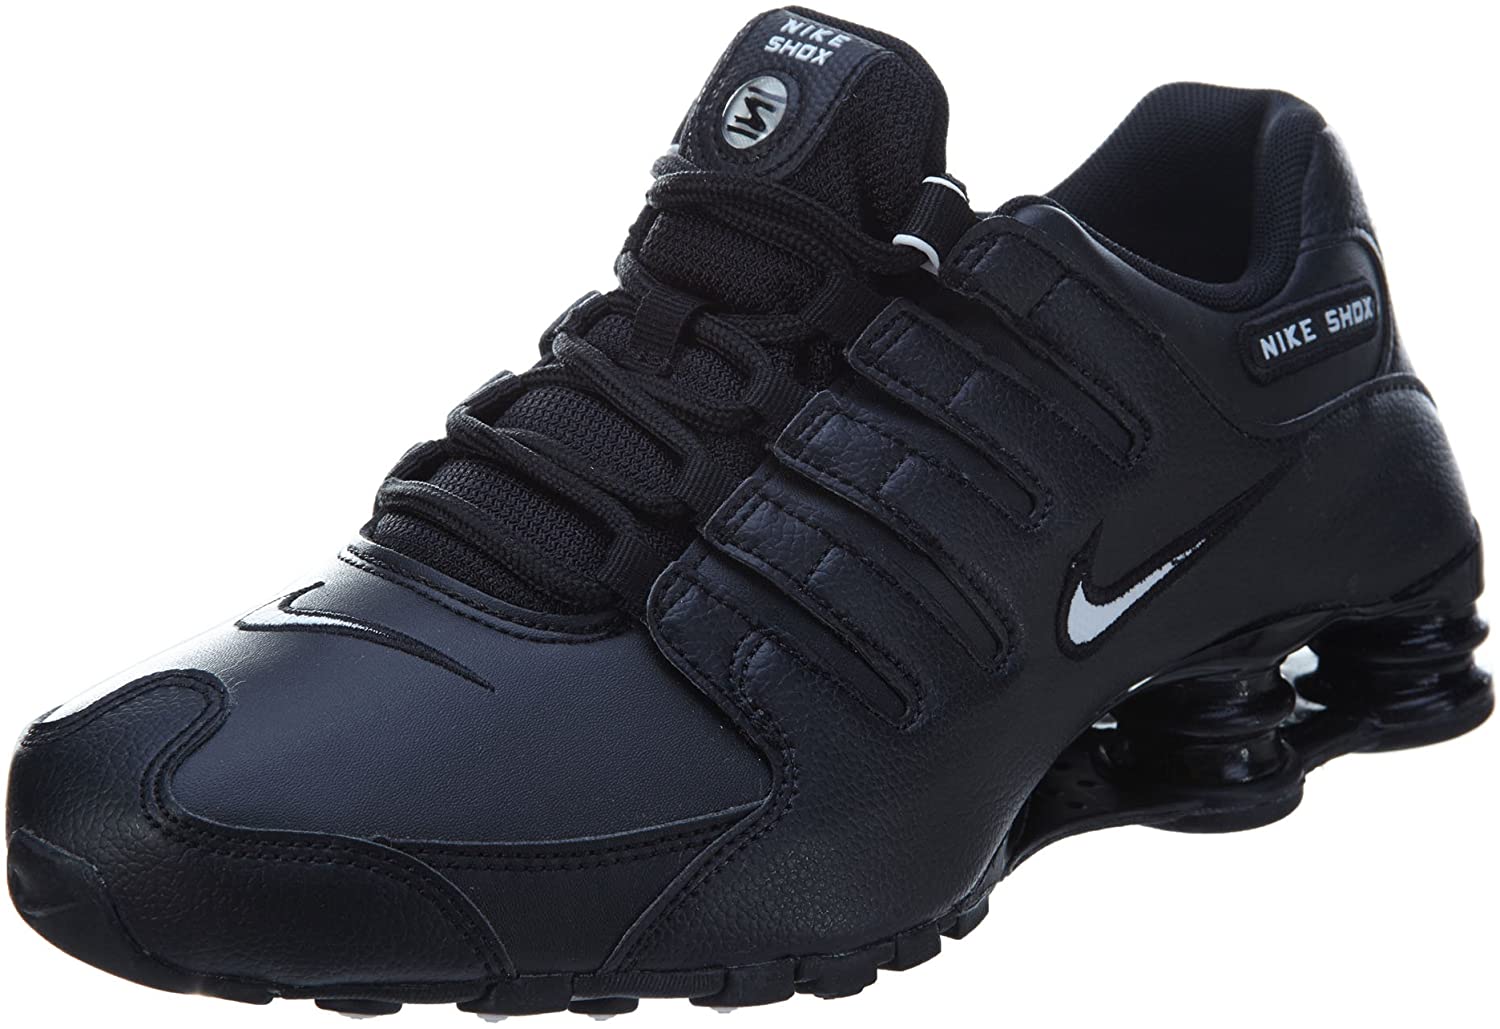 test Exclusive compensate nike shox review Arabic Contour I agree to